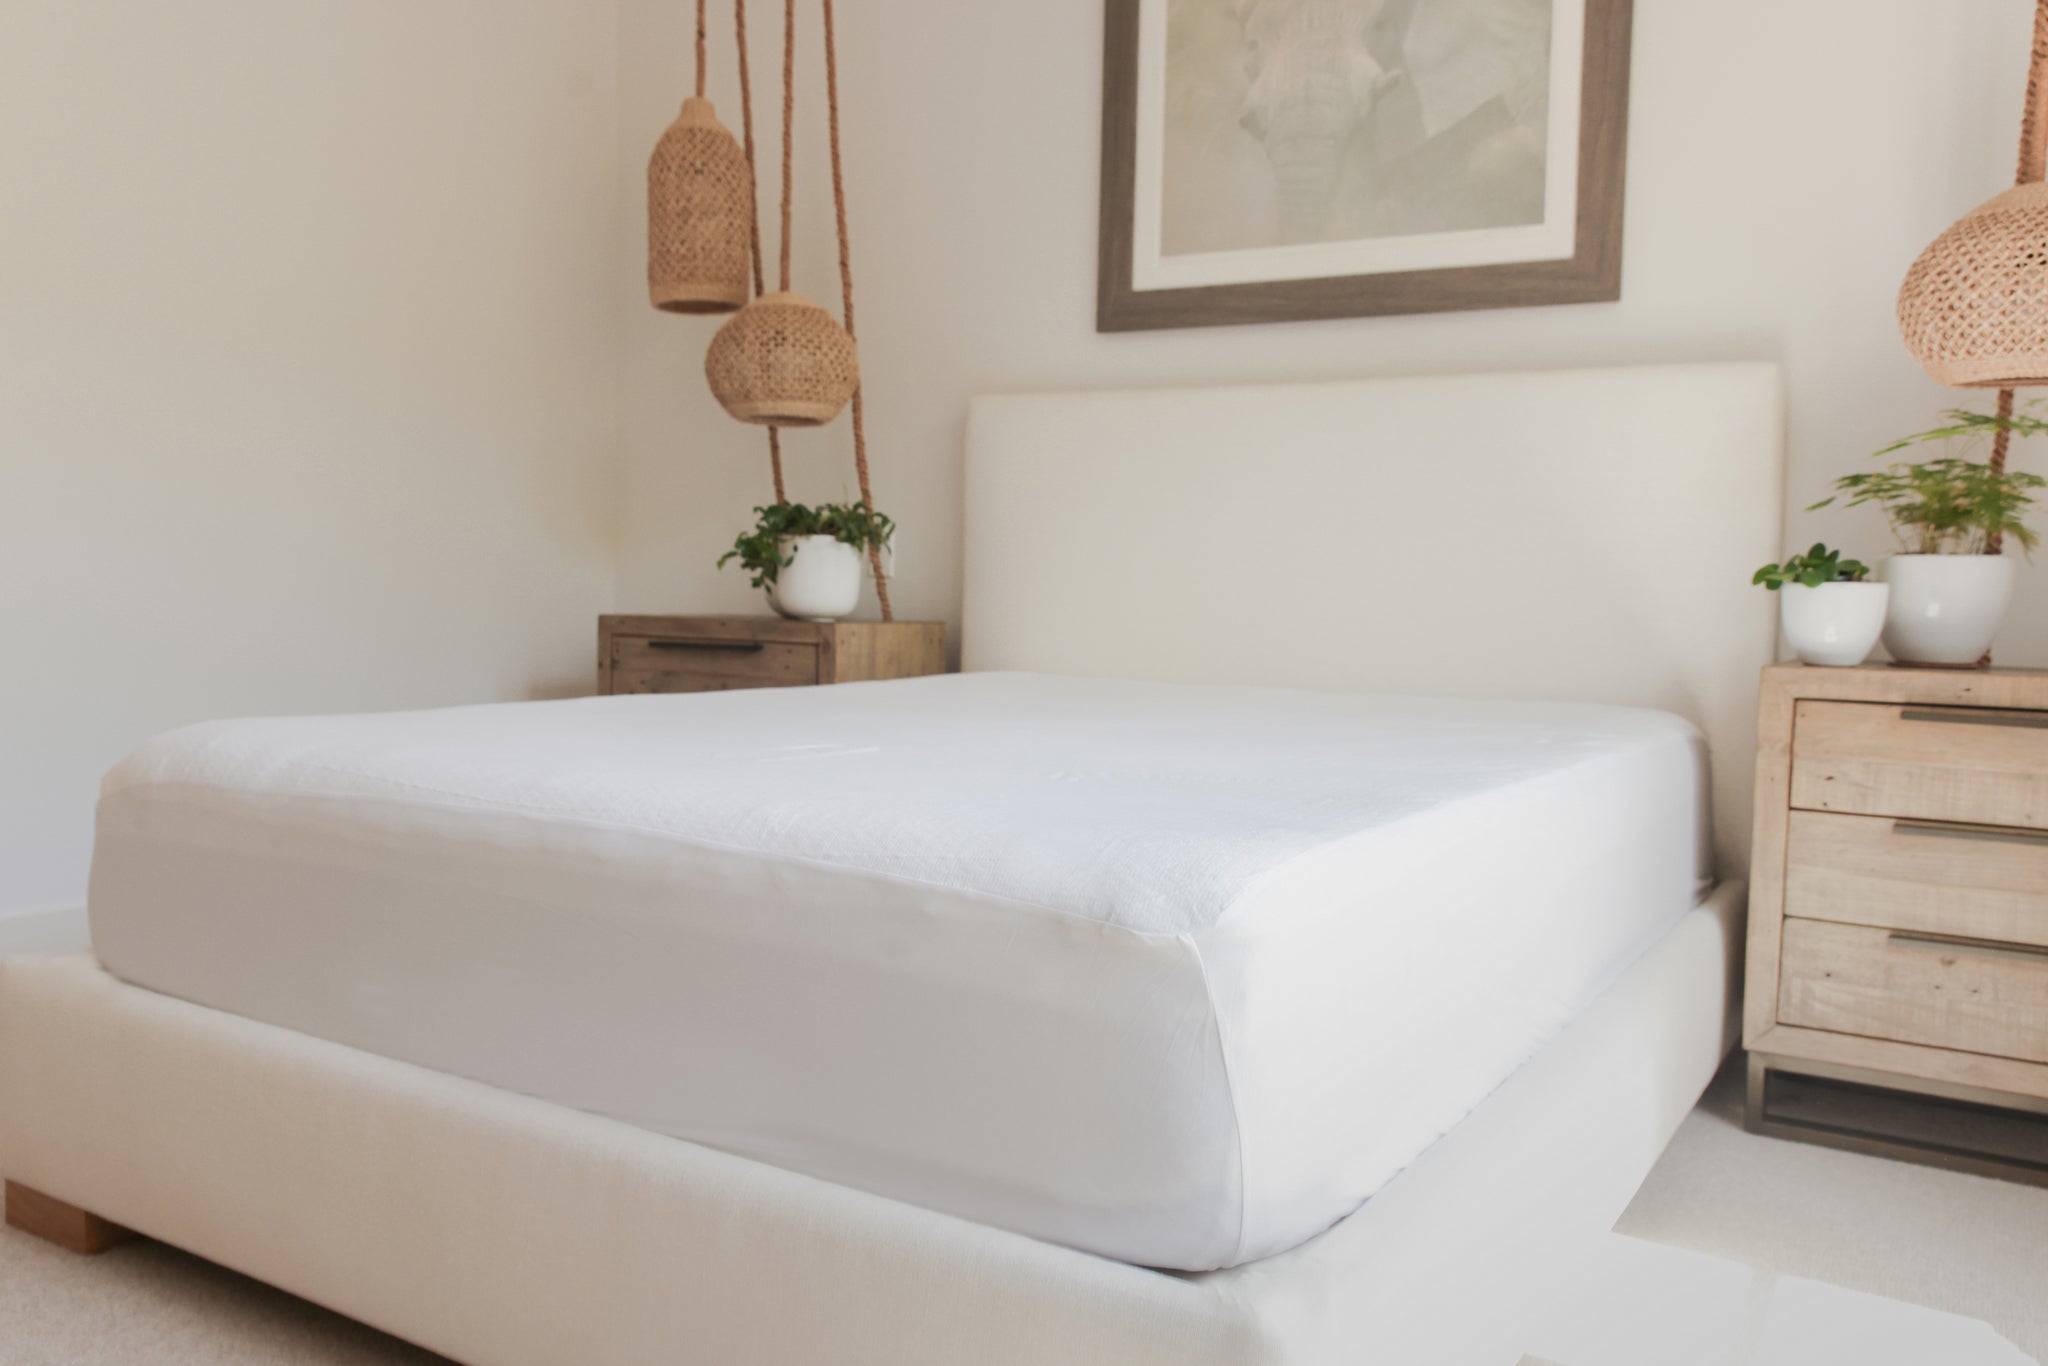 Selecting the perfect mattress protector for your needs